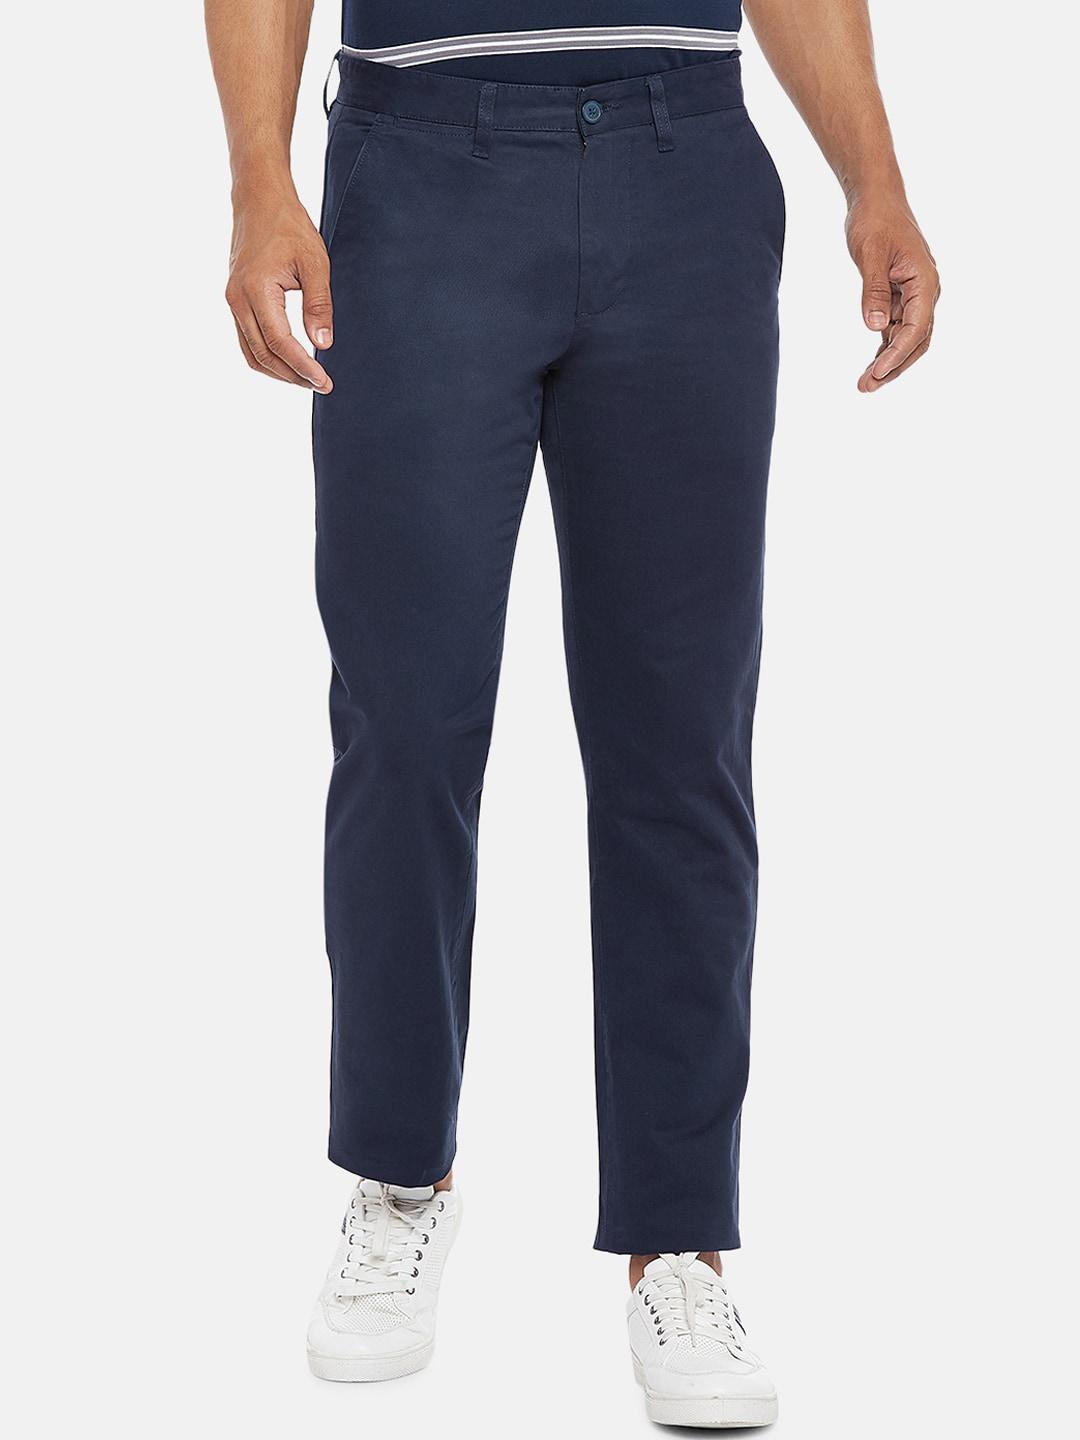 byford-by-pantaloons-men-navy-blue-pure-cotton-chinos-trousers